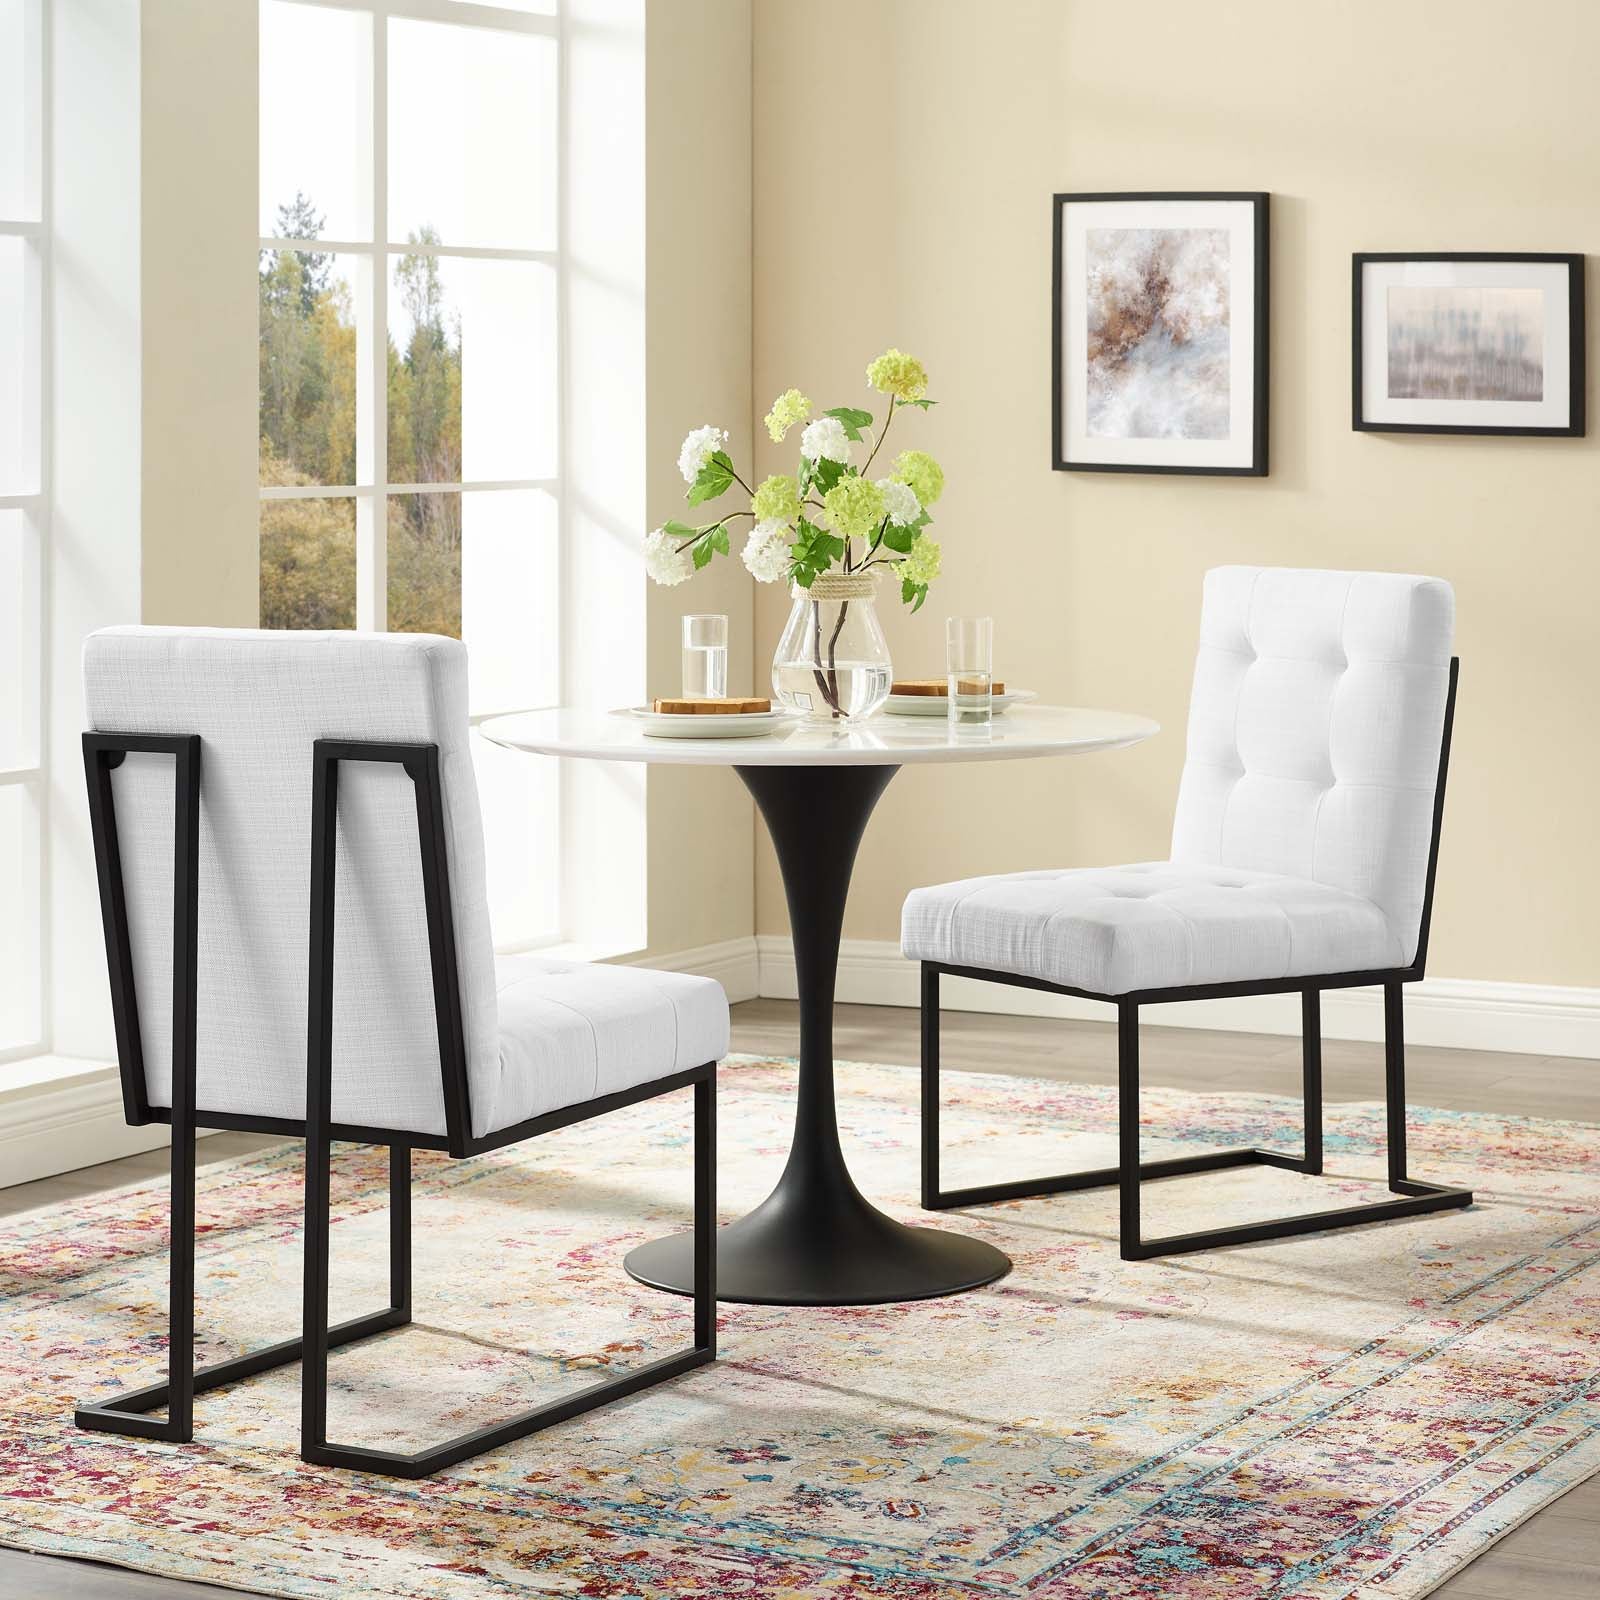 Privy Black Stainless Steel Upholstered Fabric Dining Chair Set of 2 - East Shore Modern Home Furnishings